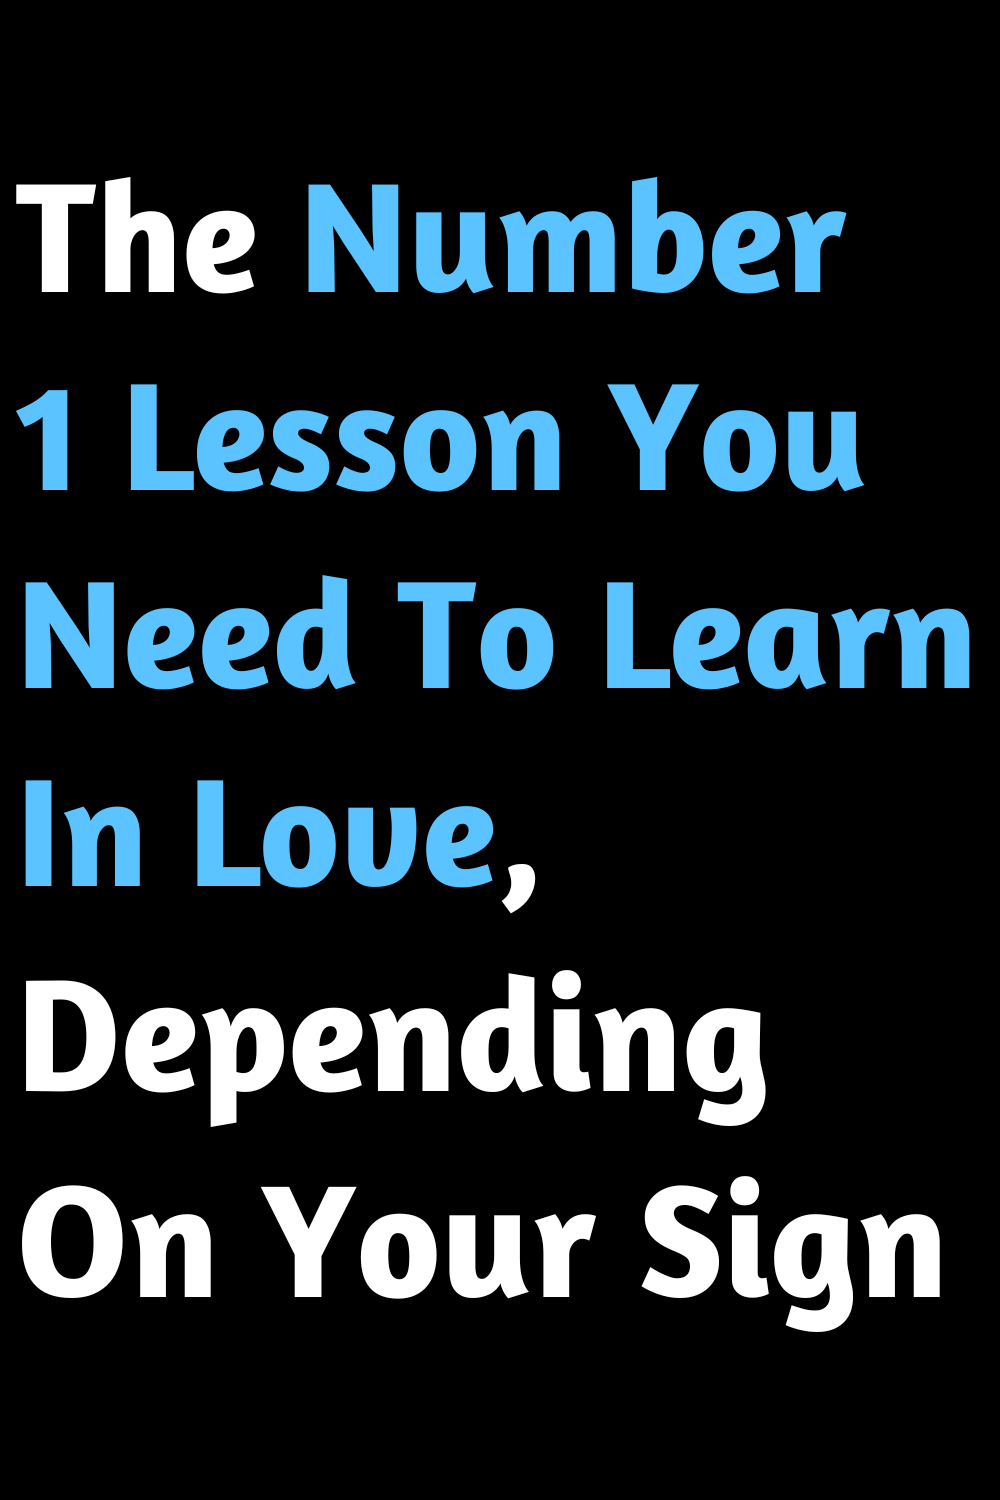 The Number 1 Lesson You Need To Learn In Love, Depending On Your Sign